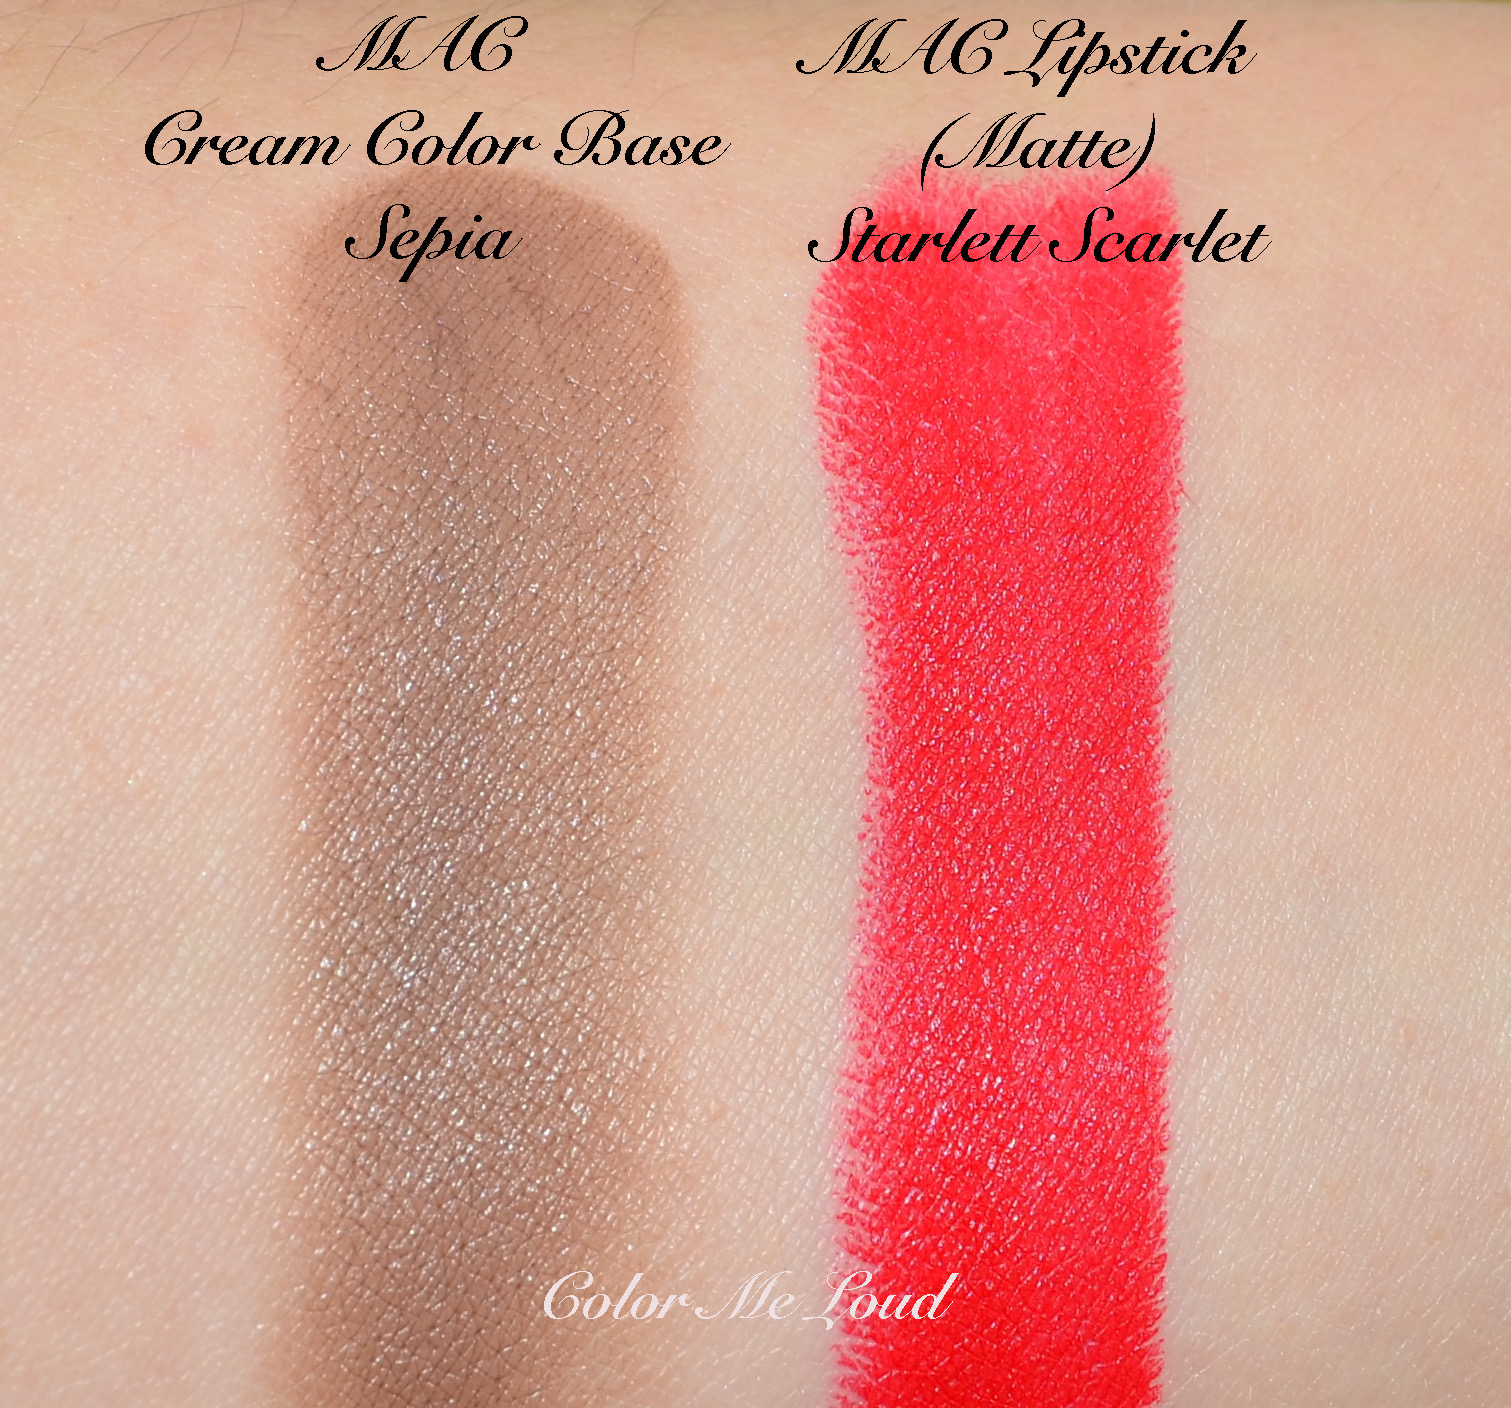 Charlotte Olympia, Starlett Scarlet Lipstick, Sepia Cream Color Base, Review, Swatch & FOTD | Color Me Loud